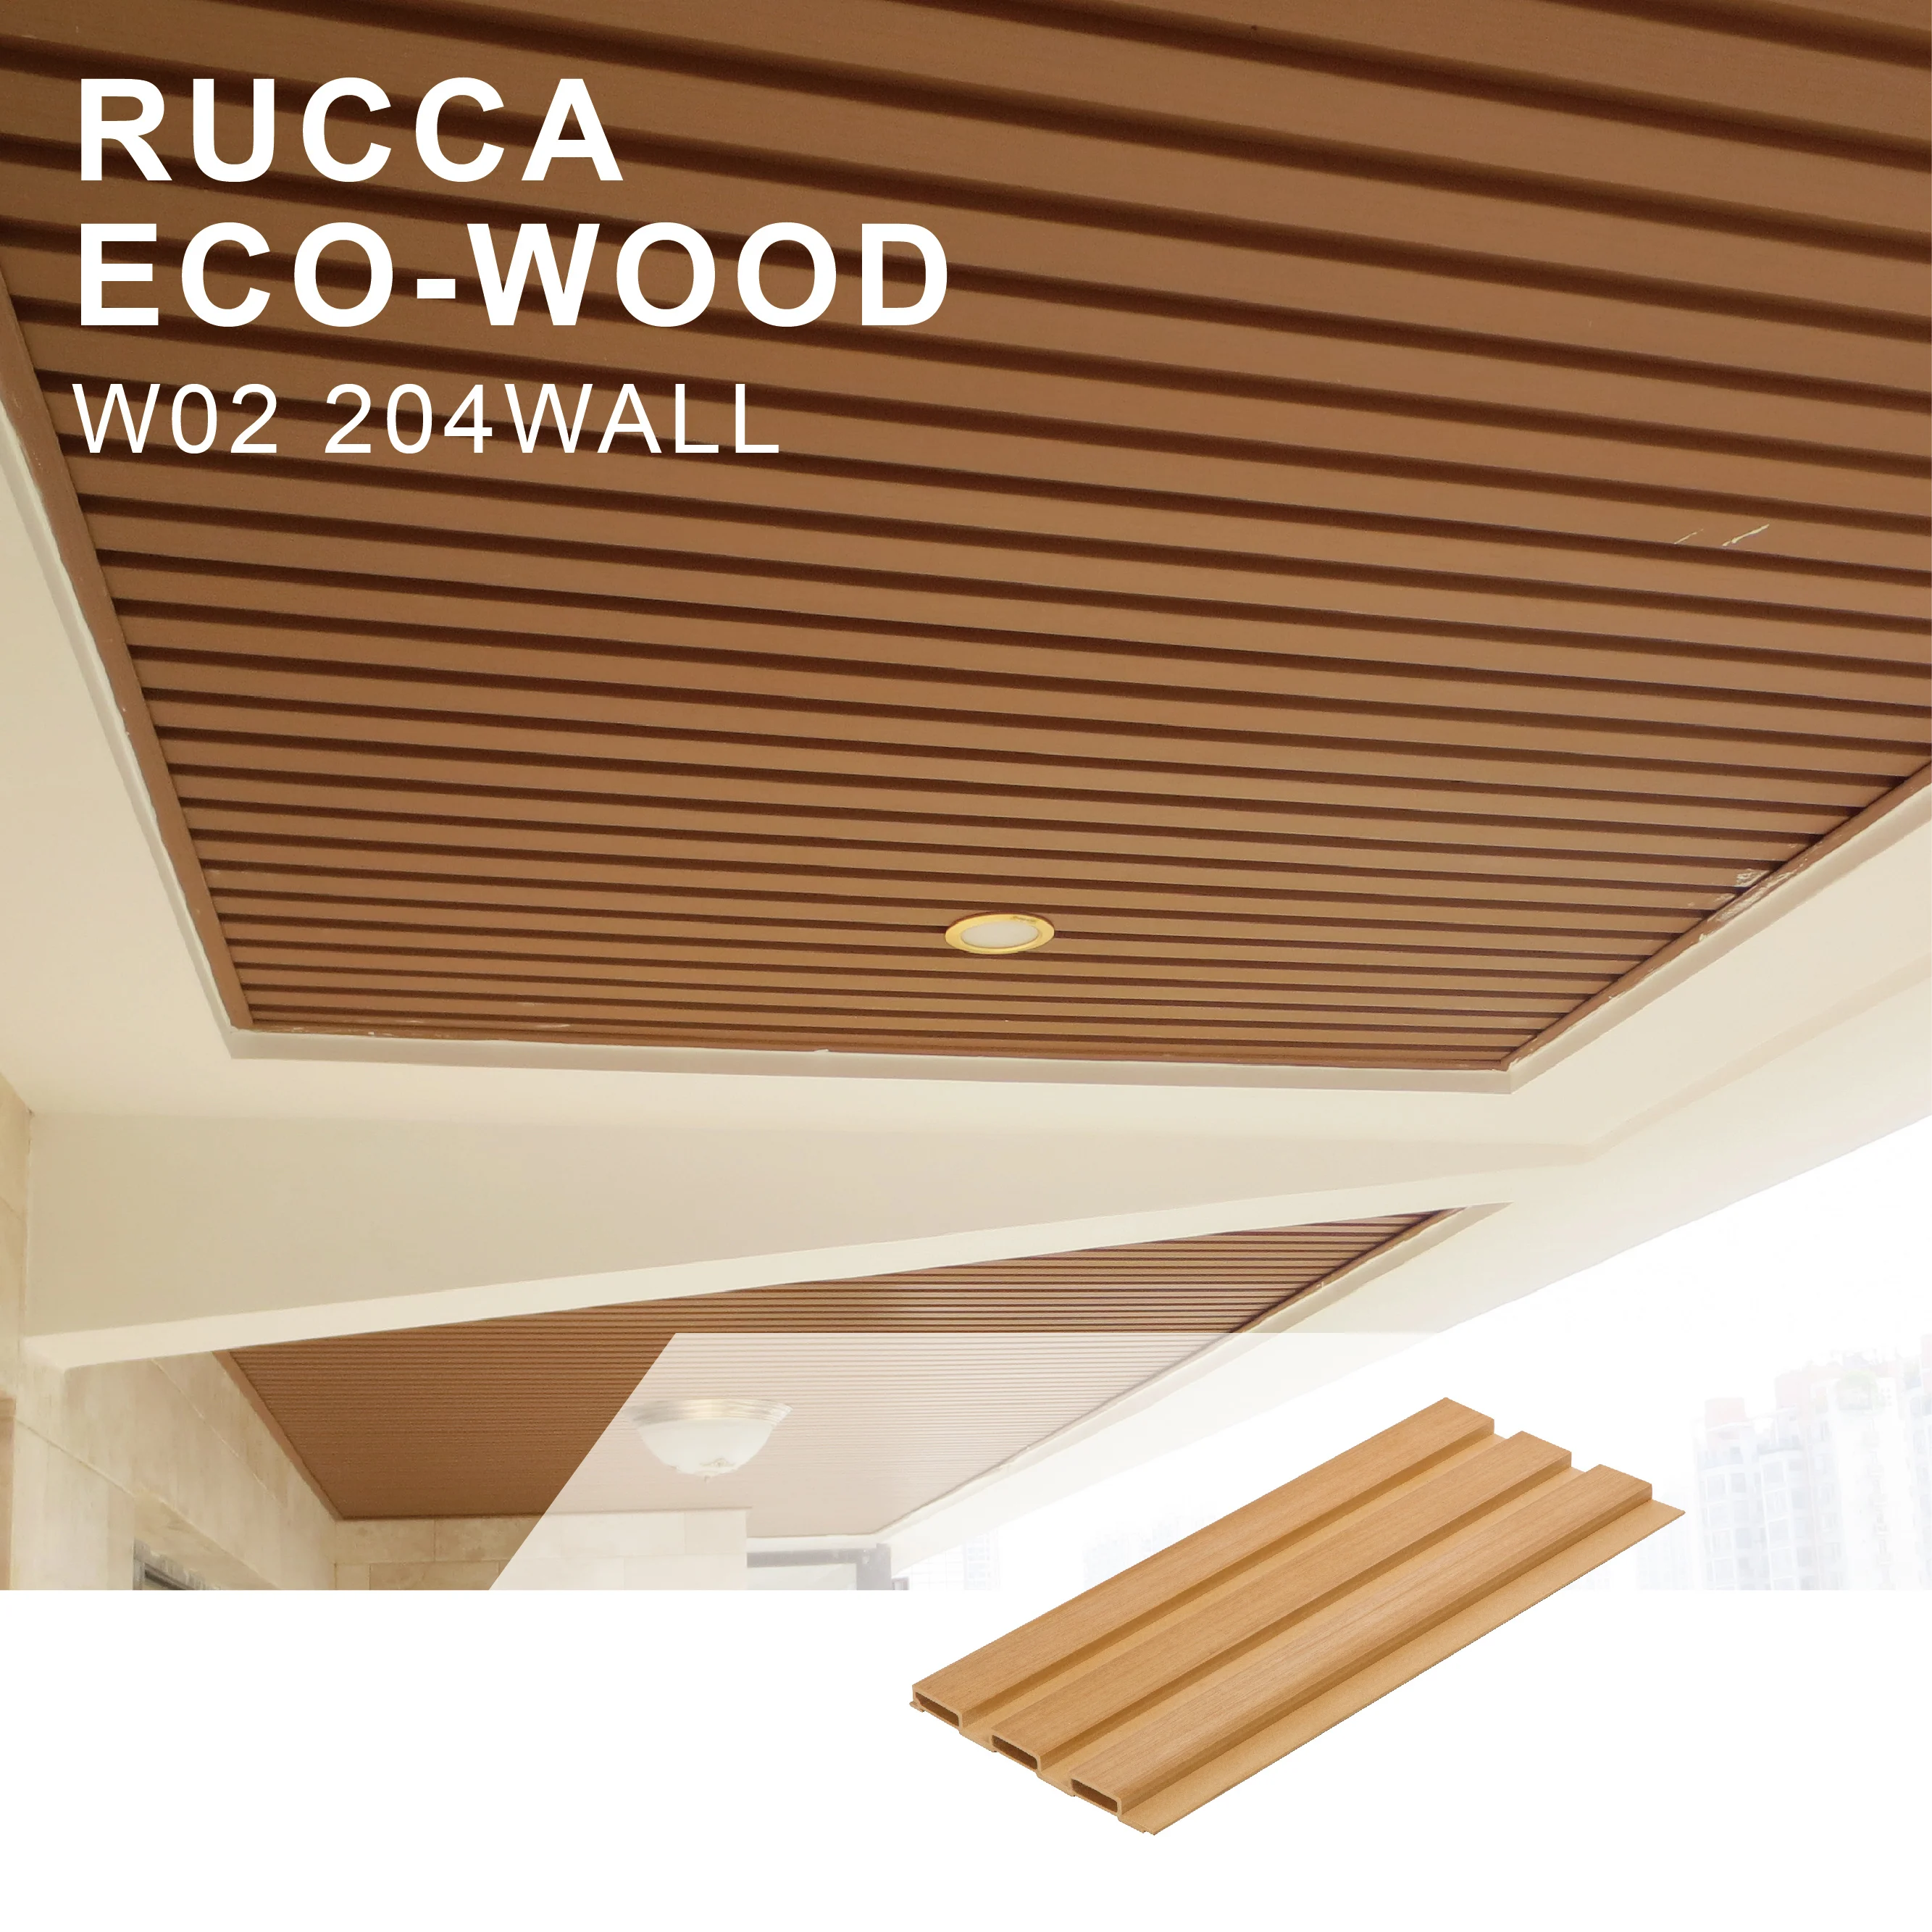 Rucca Wpc Pvc Wood And Plastic Composite New Waterproof And Anticorrosive Interior Wall Cladding Panel 204 16mm Buy Interior Wall Panelling Wood